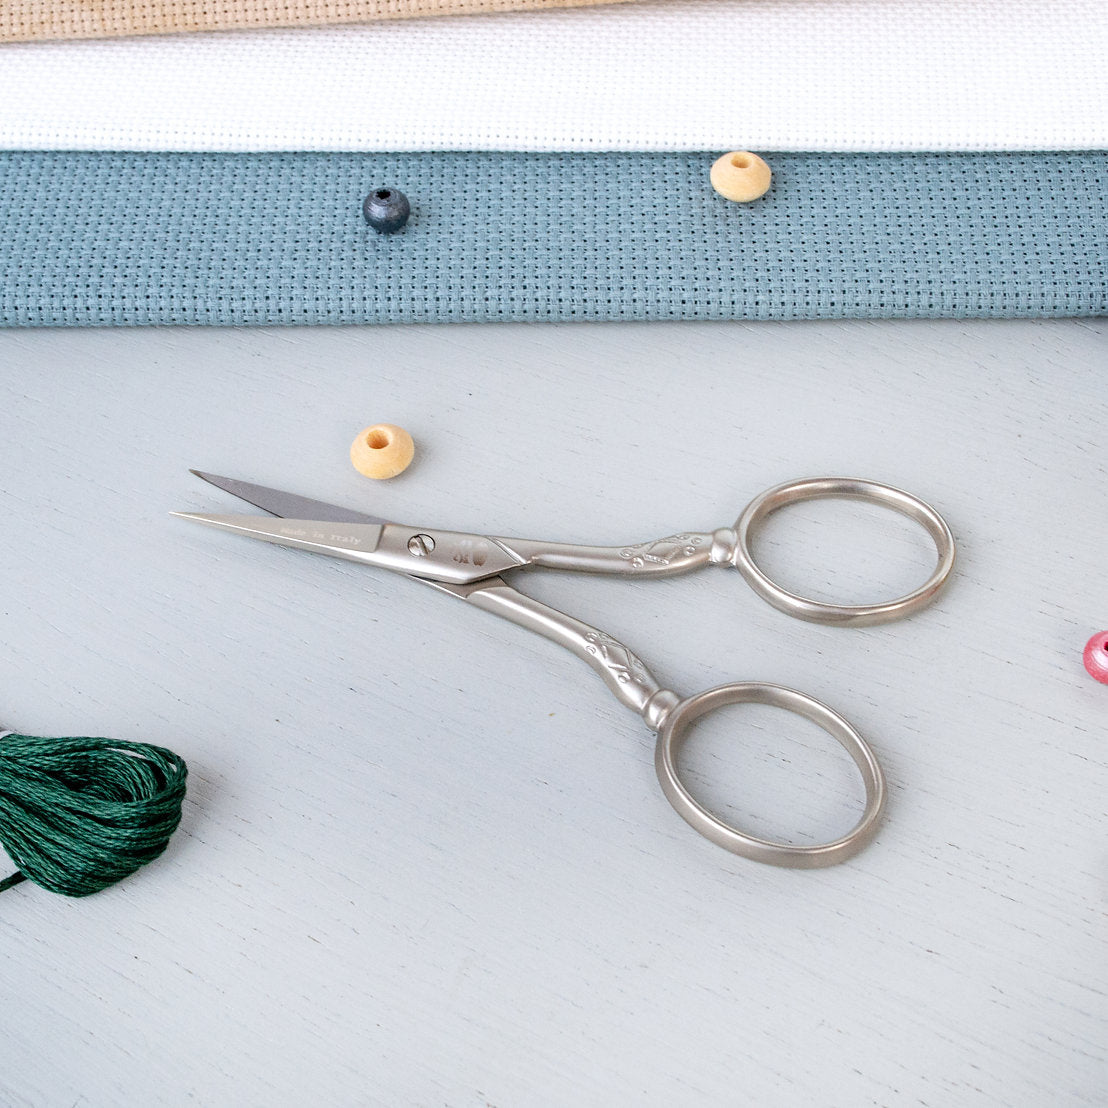 Embroidery Scissors 9 cm Croma Collection by Premax 10380: Quality and Precision in your Sewing and Embroidery Projects